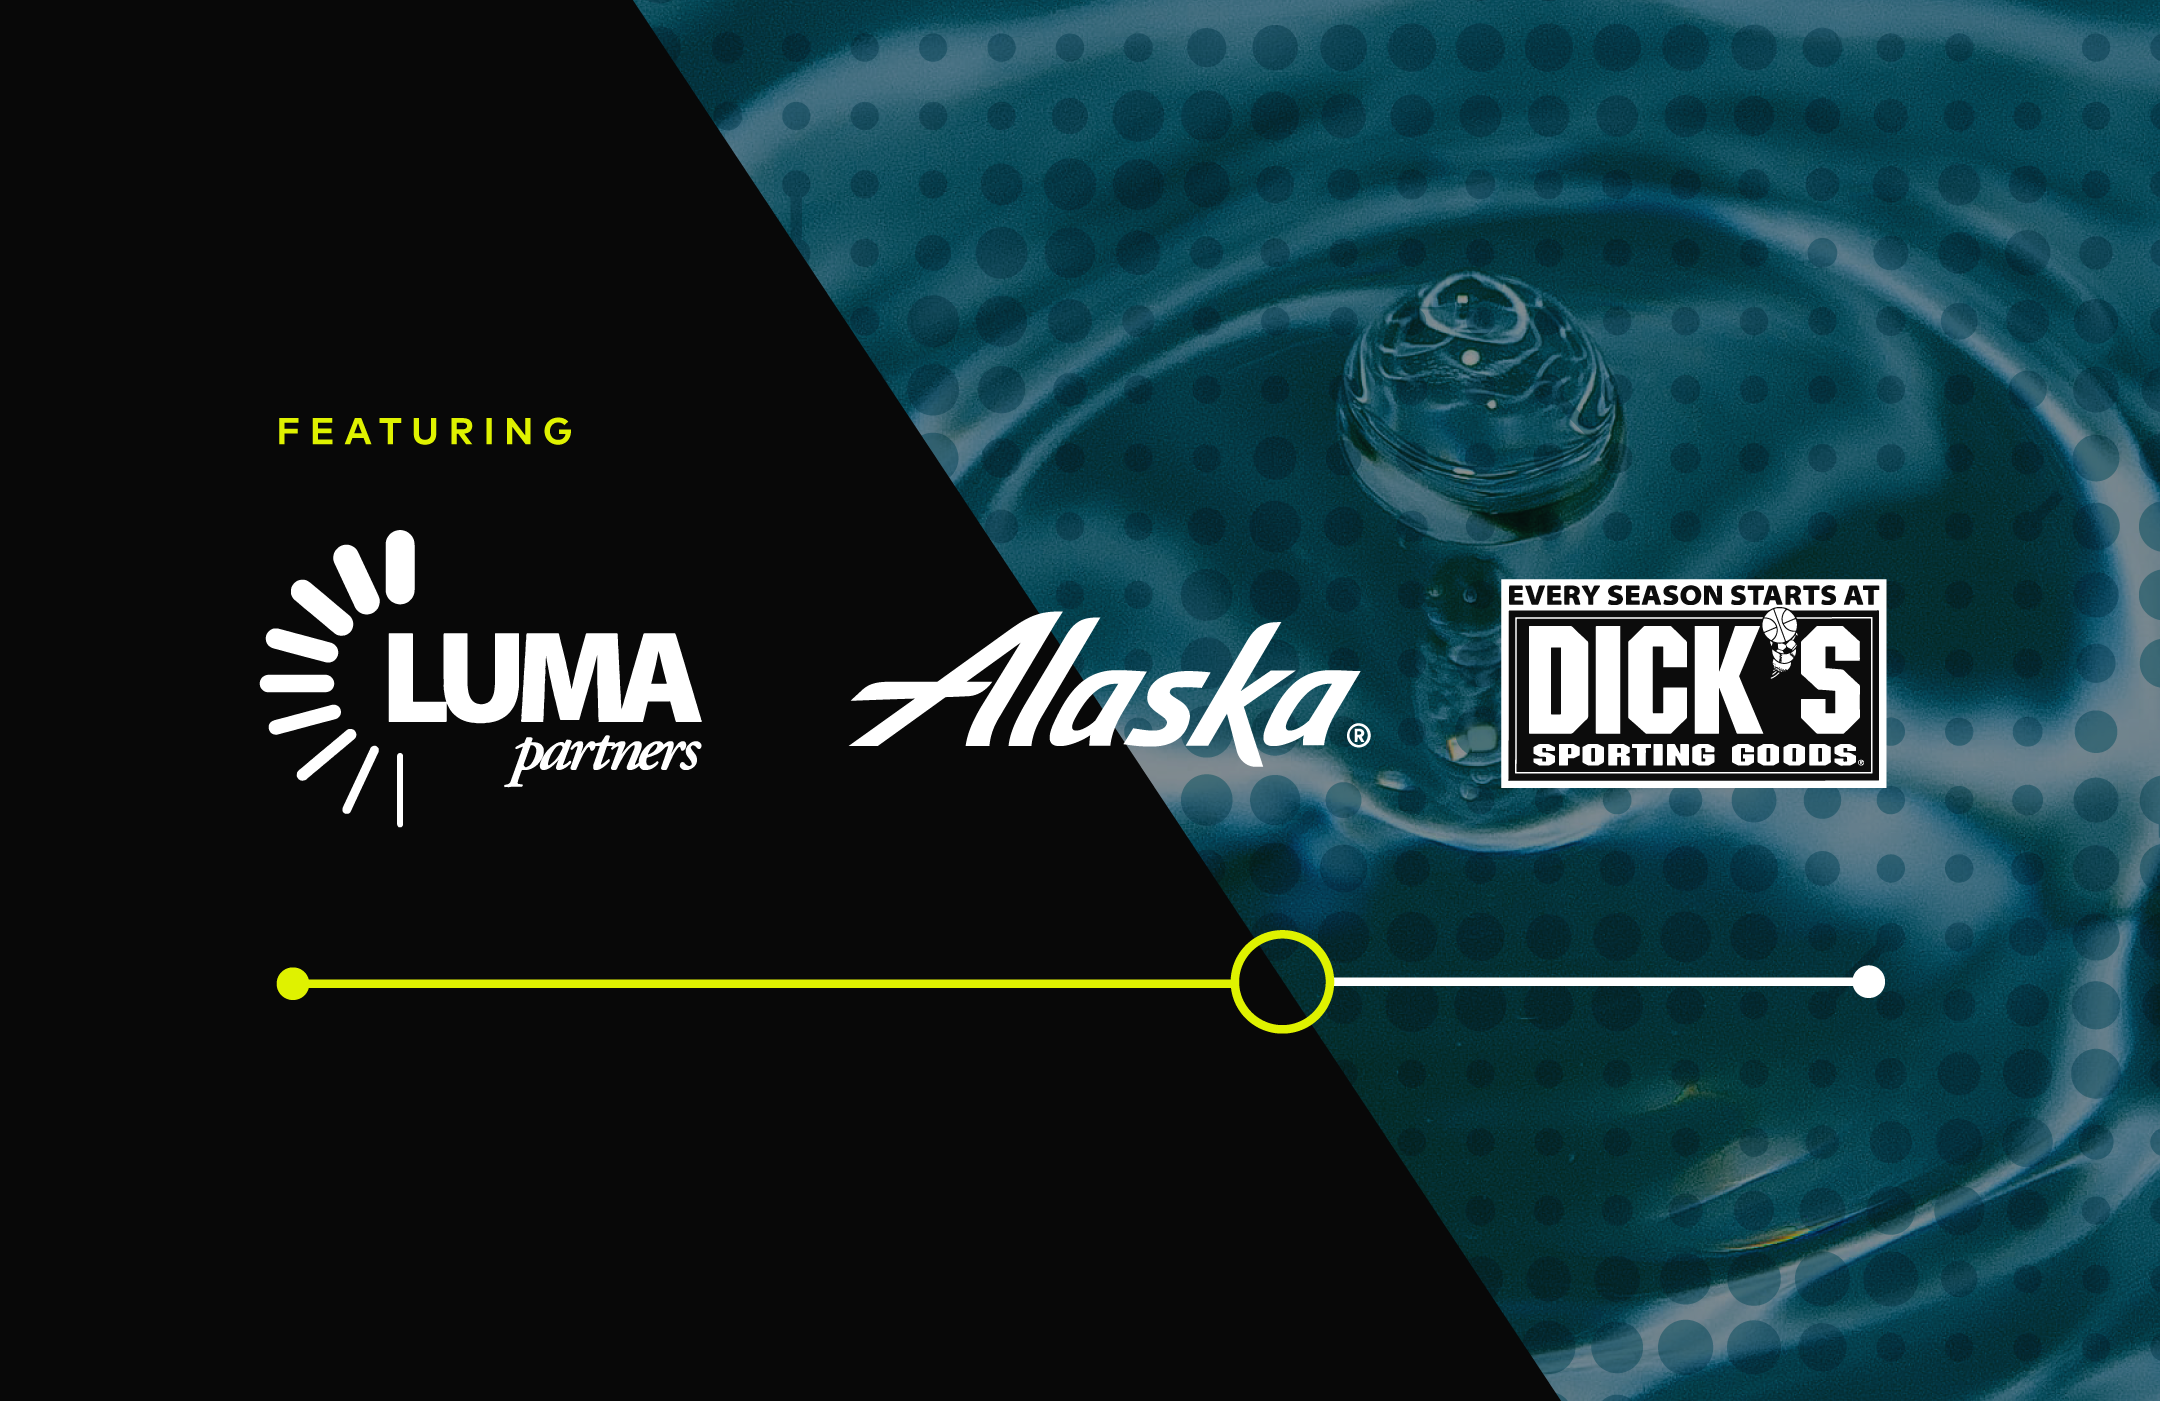 Webinar promo image with the logos of Luma Partners, Alaska Airlines, and Dick's Sporting Goods